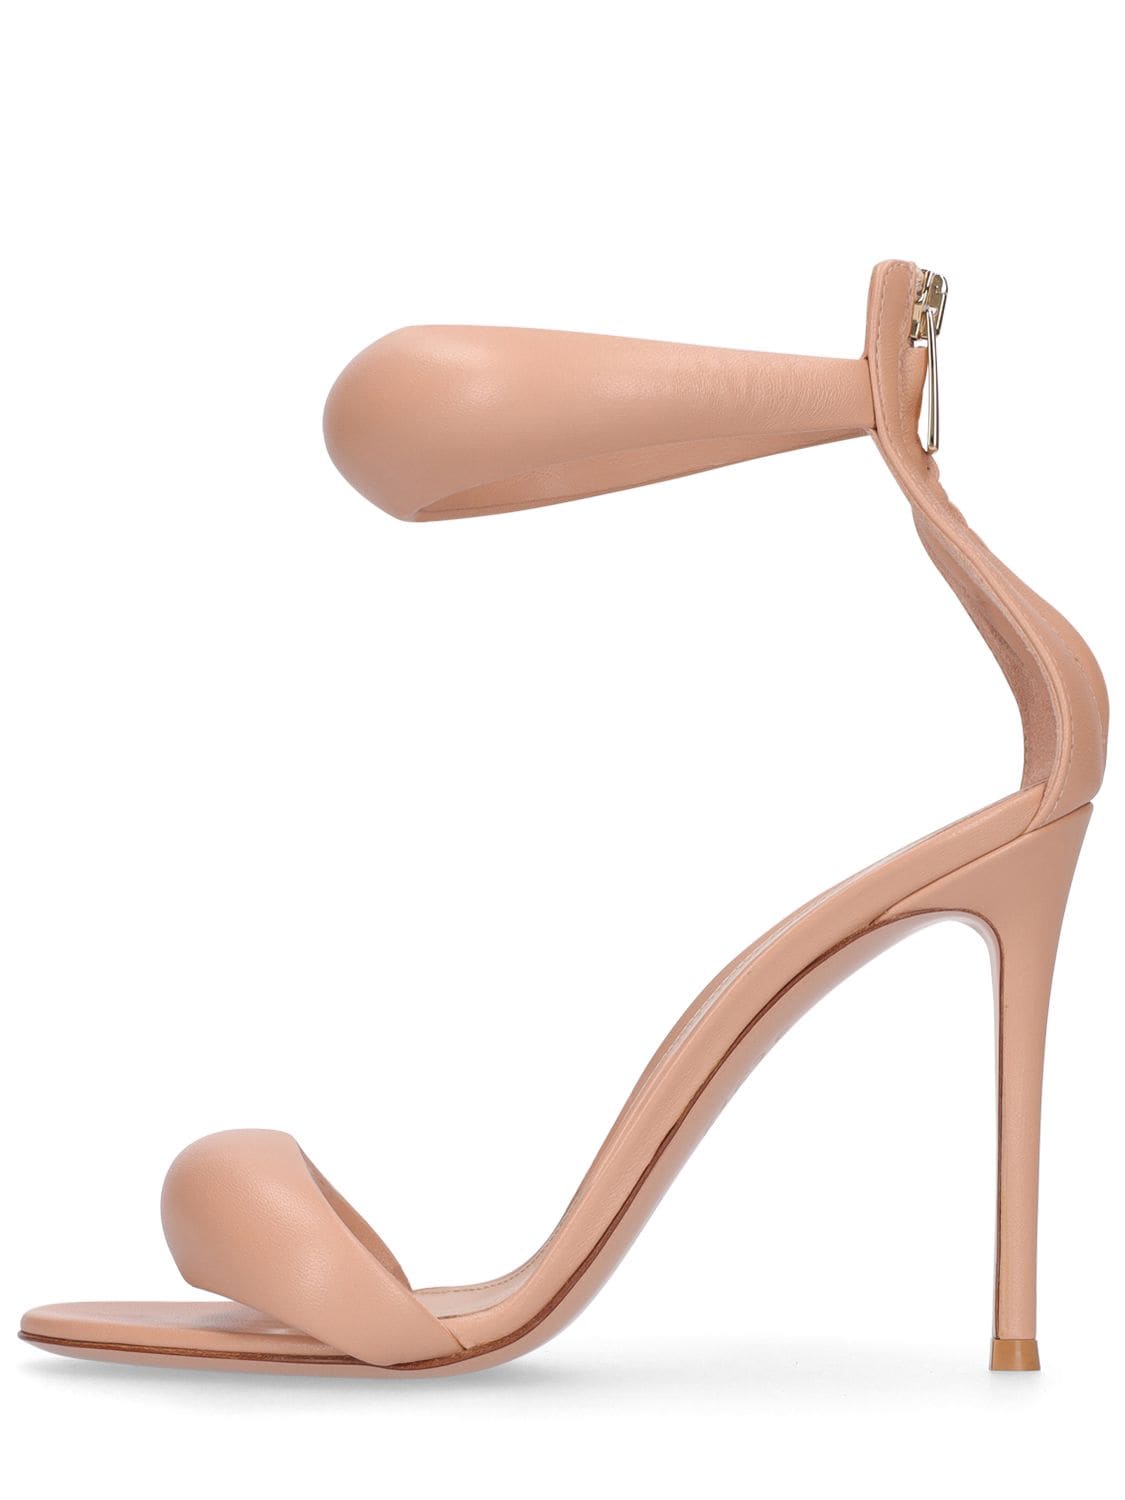 Gianvito Rossi 105mm Bijoux Padded Leather Sandals In Nude